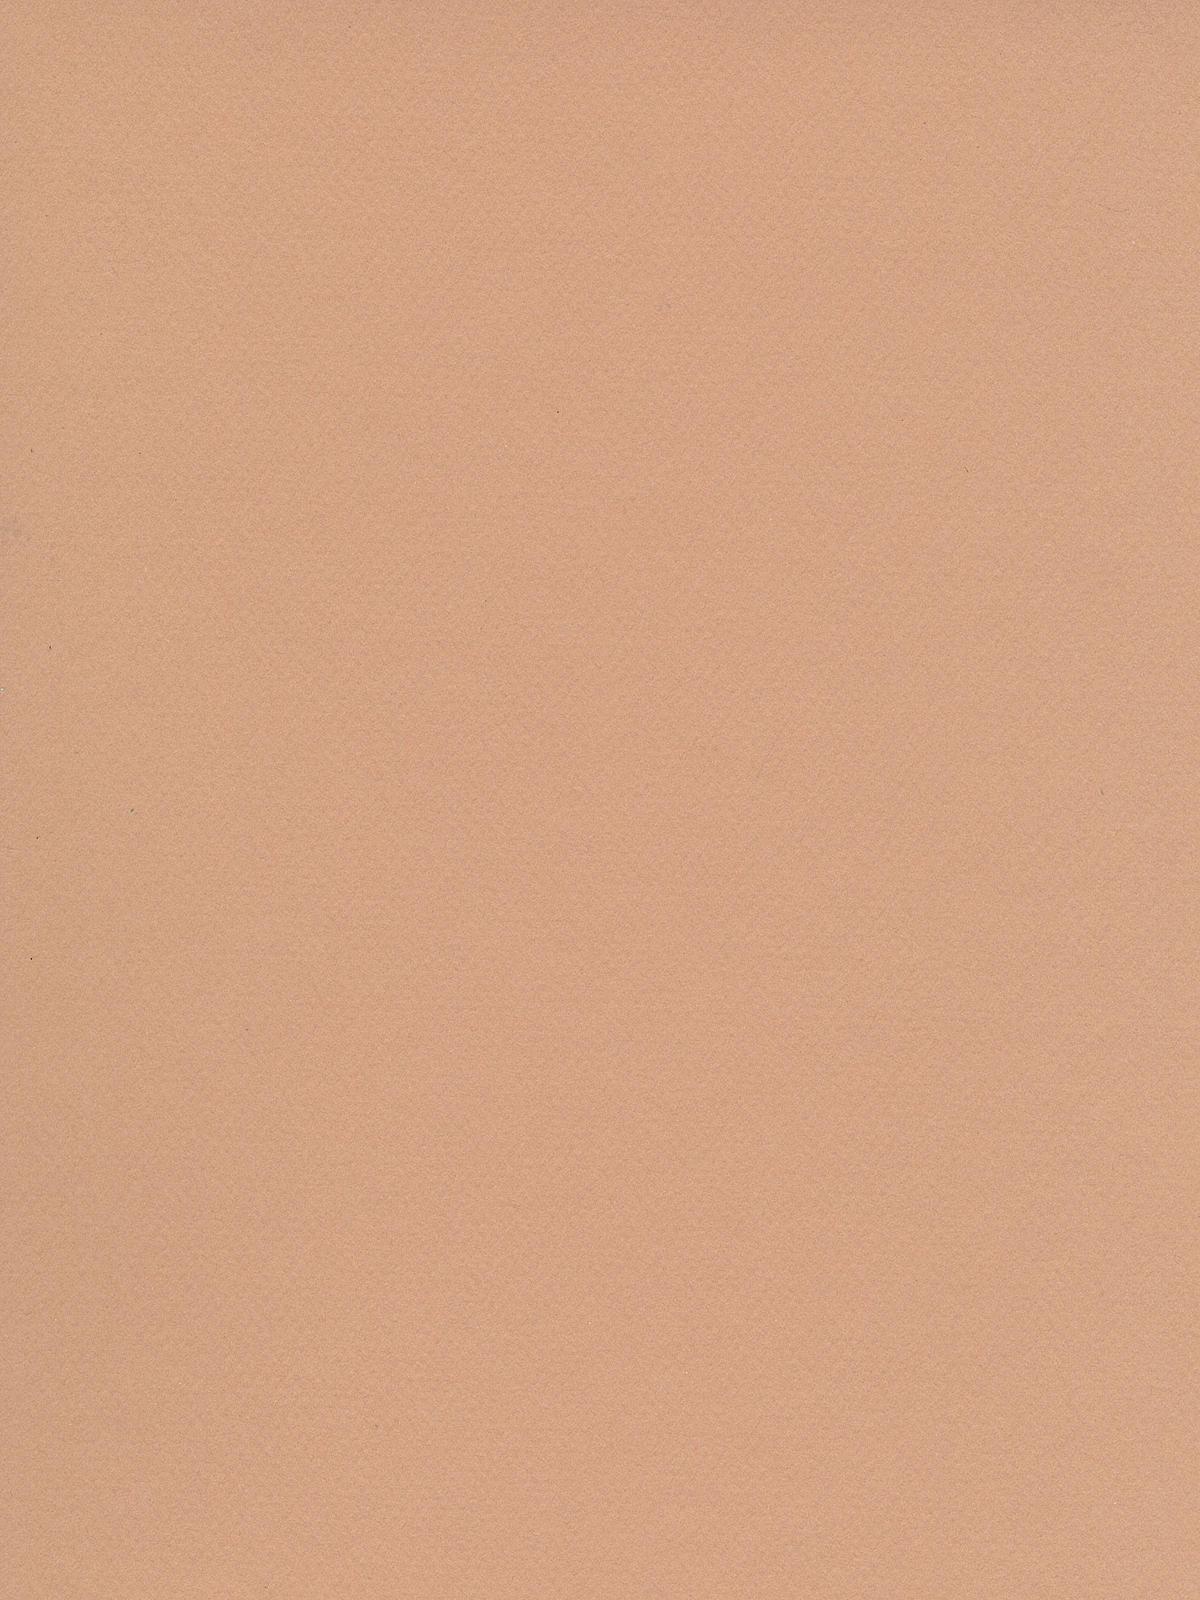 Mi-teintes Tinted Paper Oyster 19 In. X 25 In.